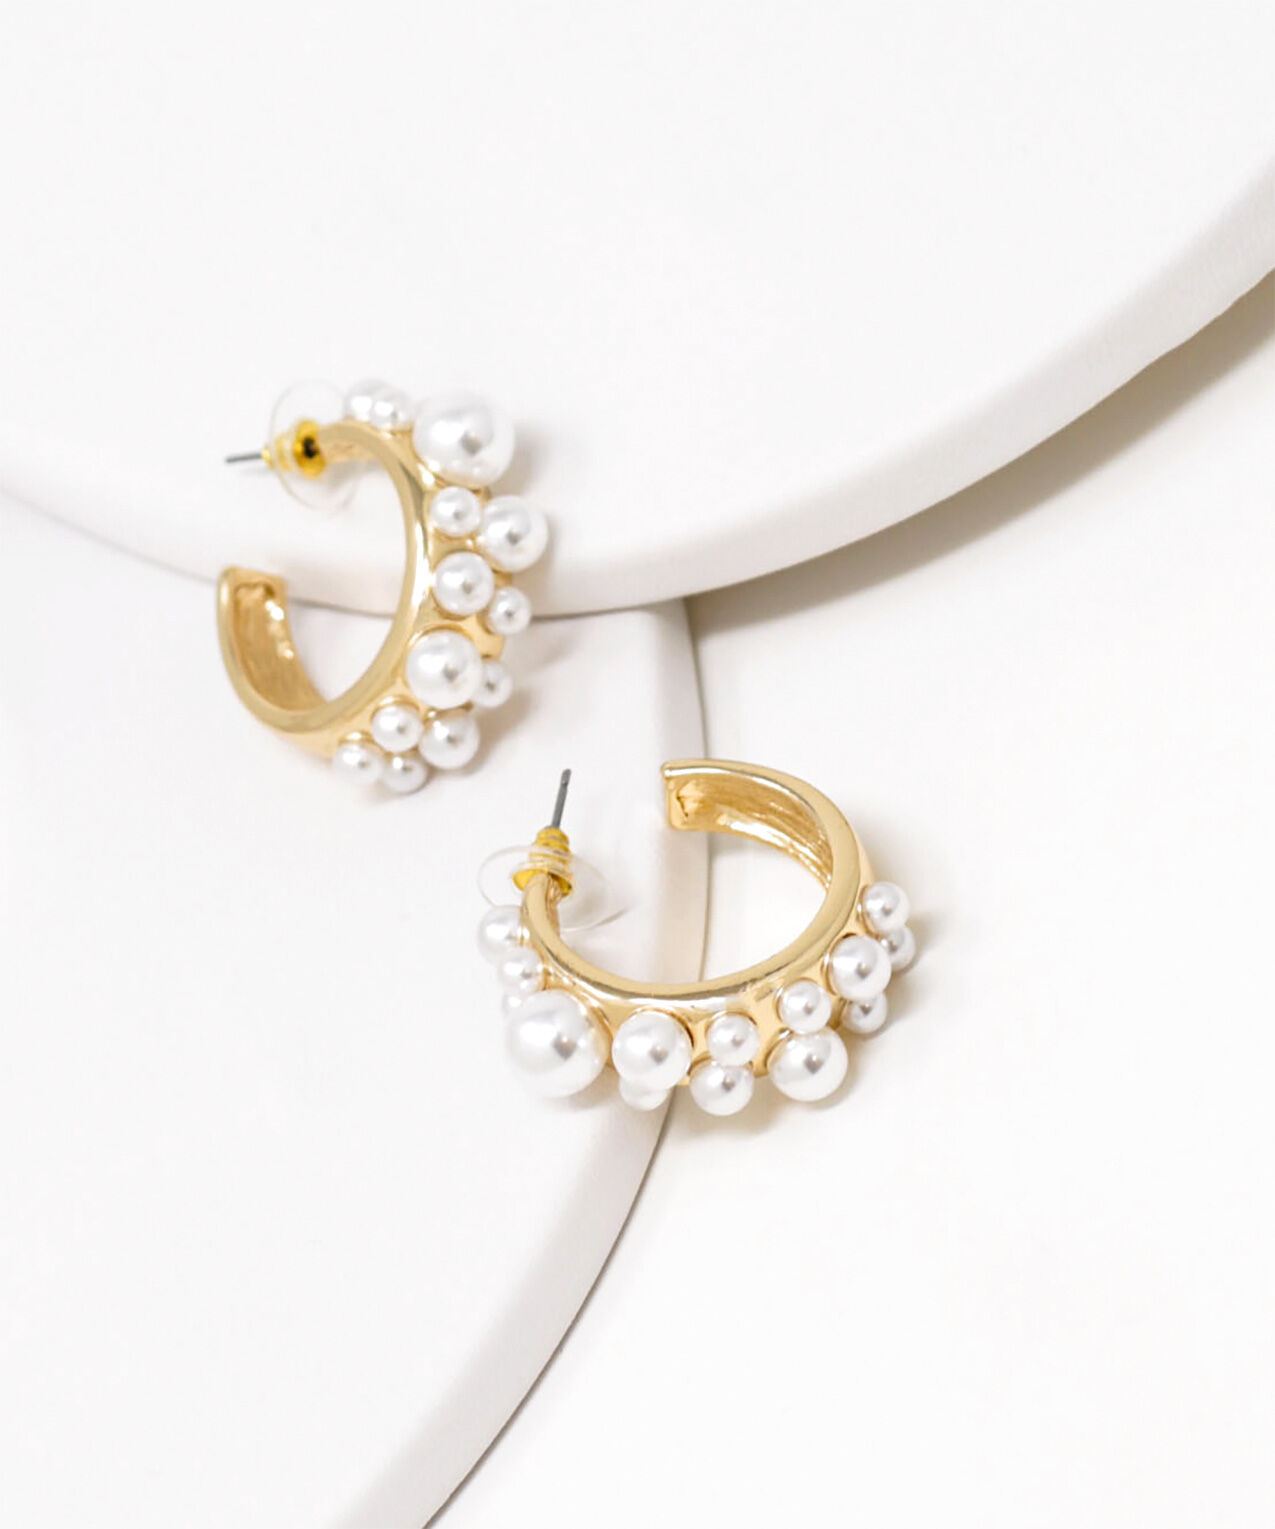 Small Gold Hoop Earrings with White Pearls